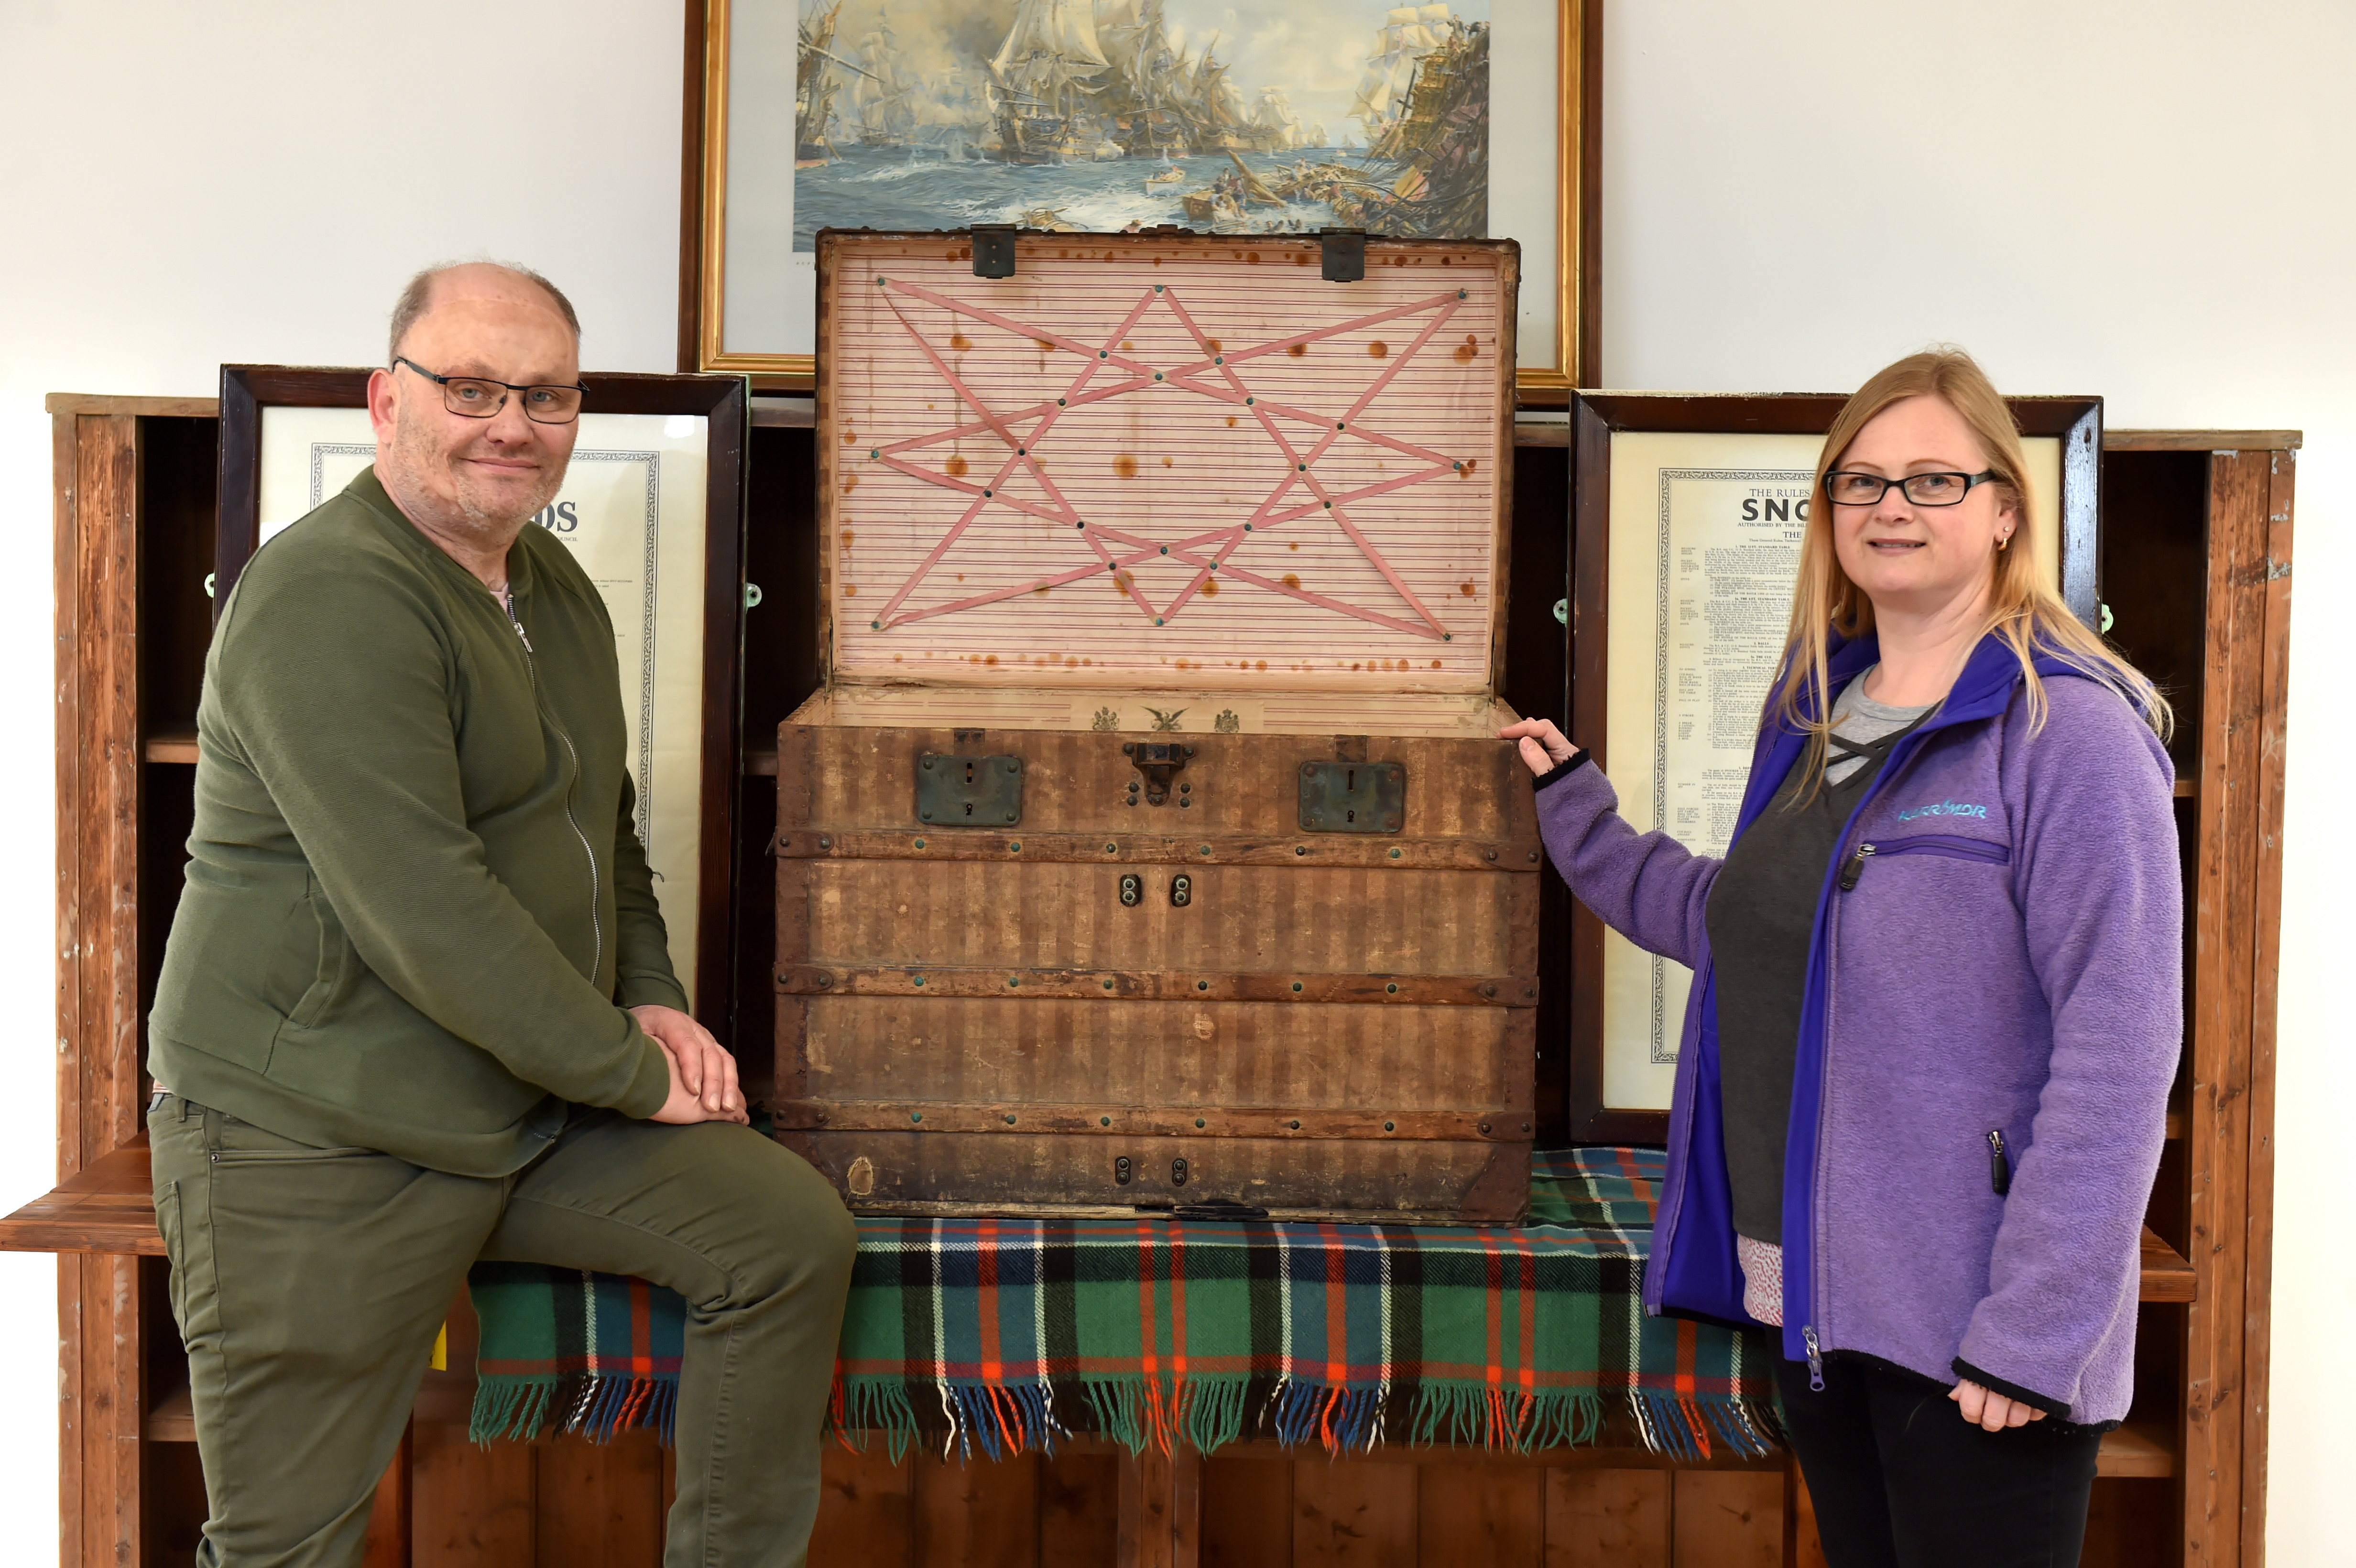 Clive Hampshire and Angela Allan from Smile Scotland with the vintage steamer trunk.